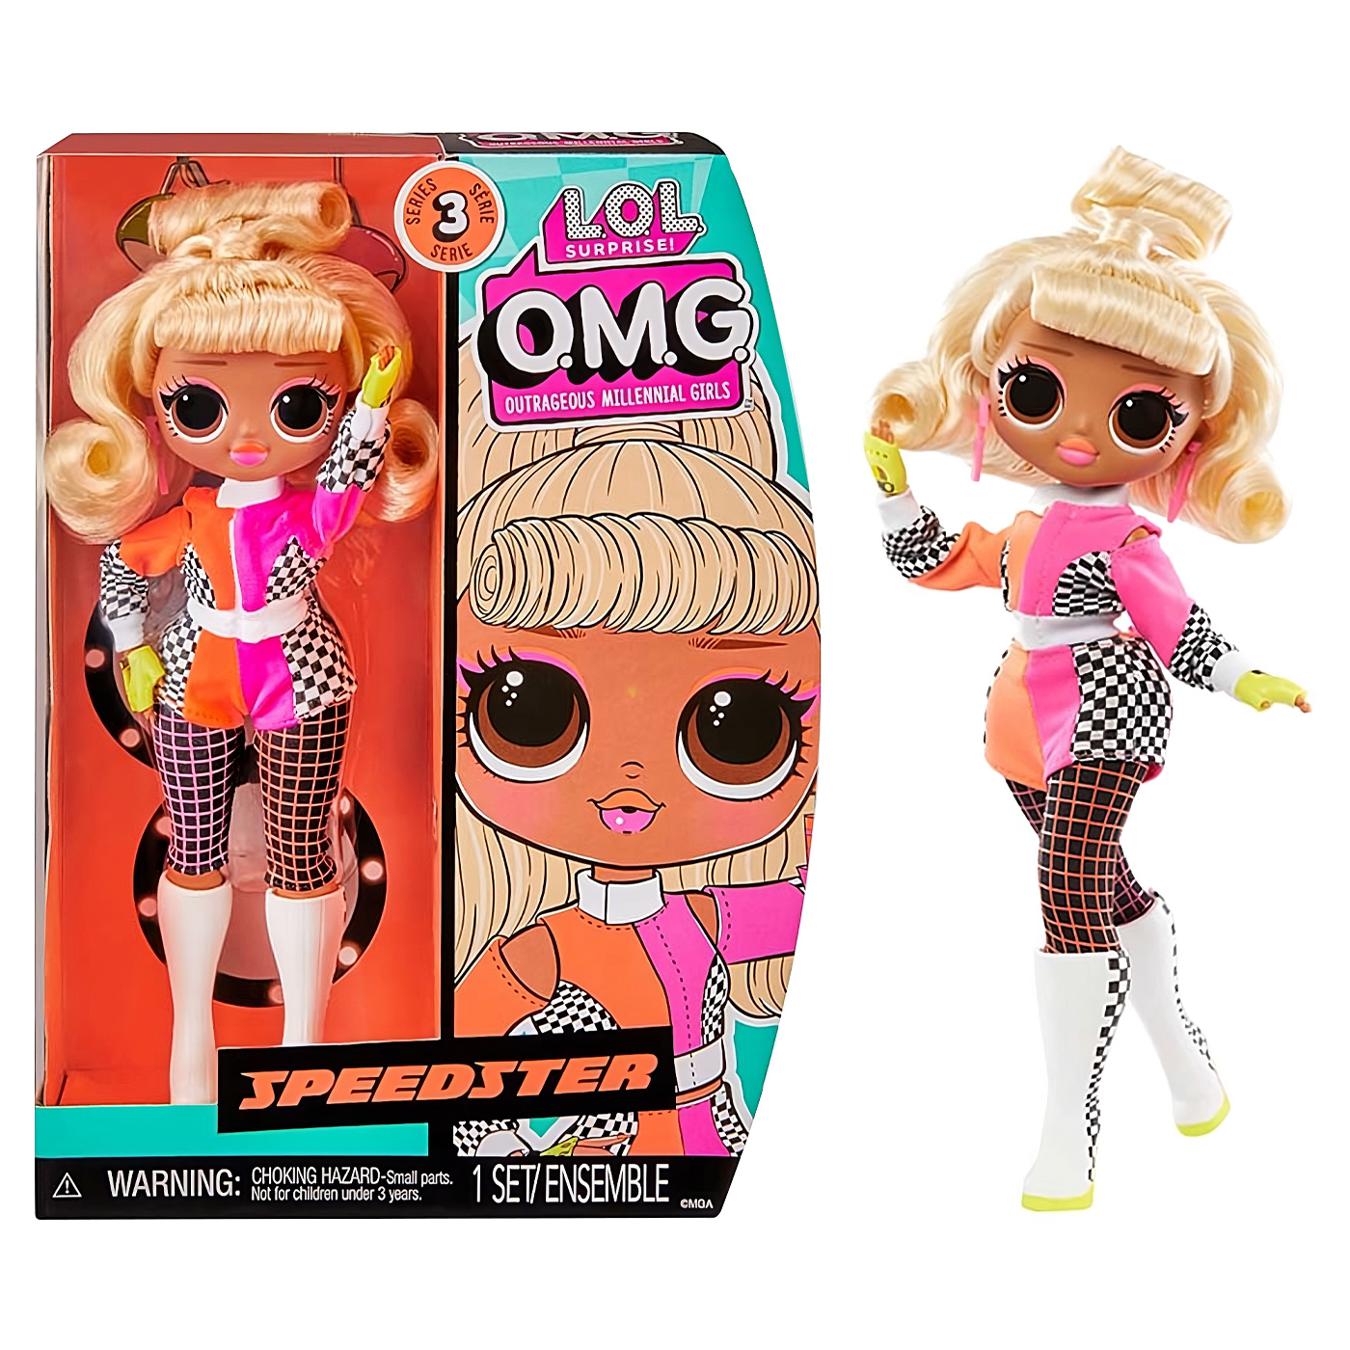 Doll L.O.L. Surprise! series omg Hos s3 speedster with access